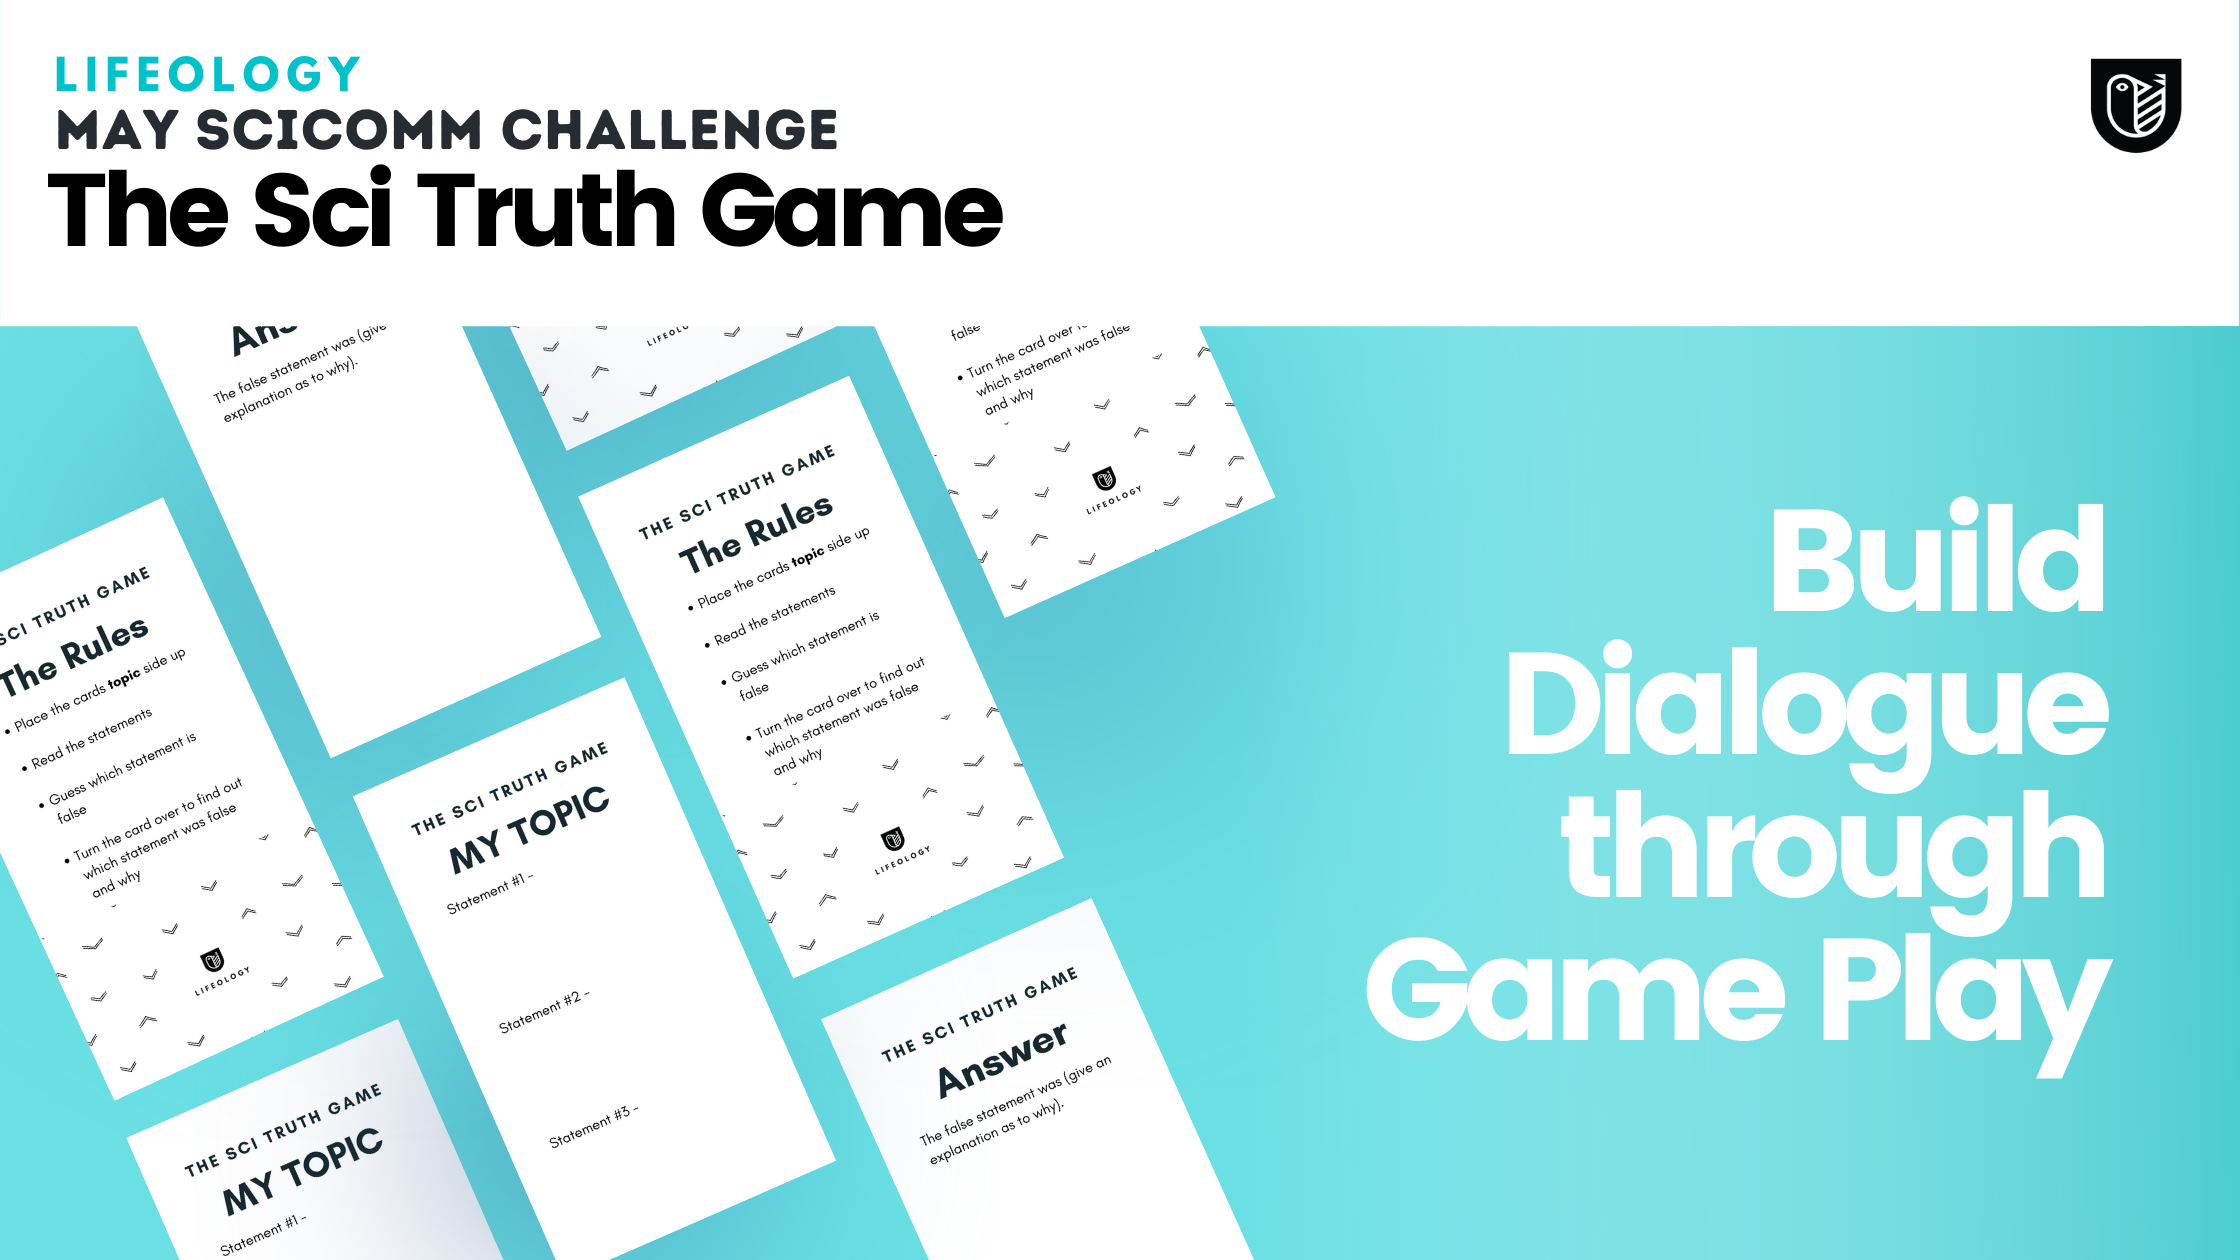 May Scicomm Challenge - the sci truth game- build dialogue through game play